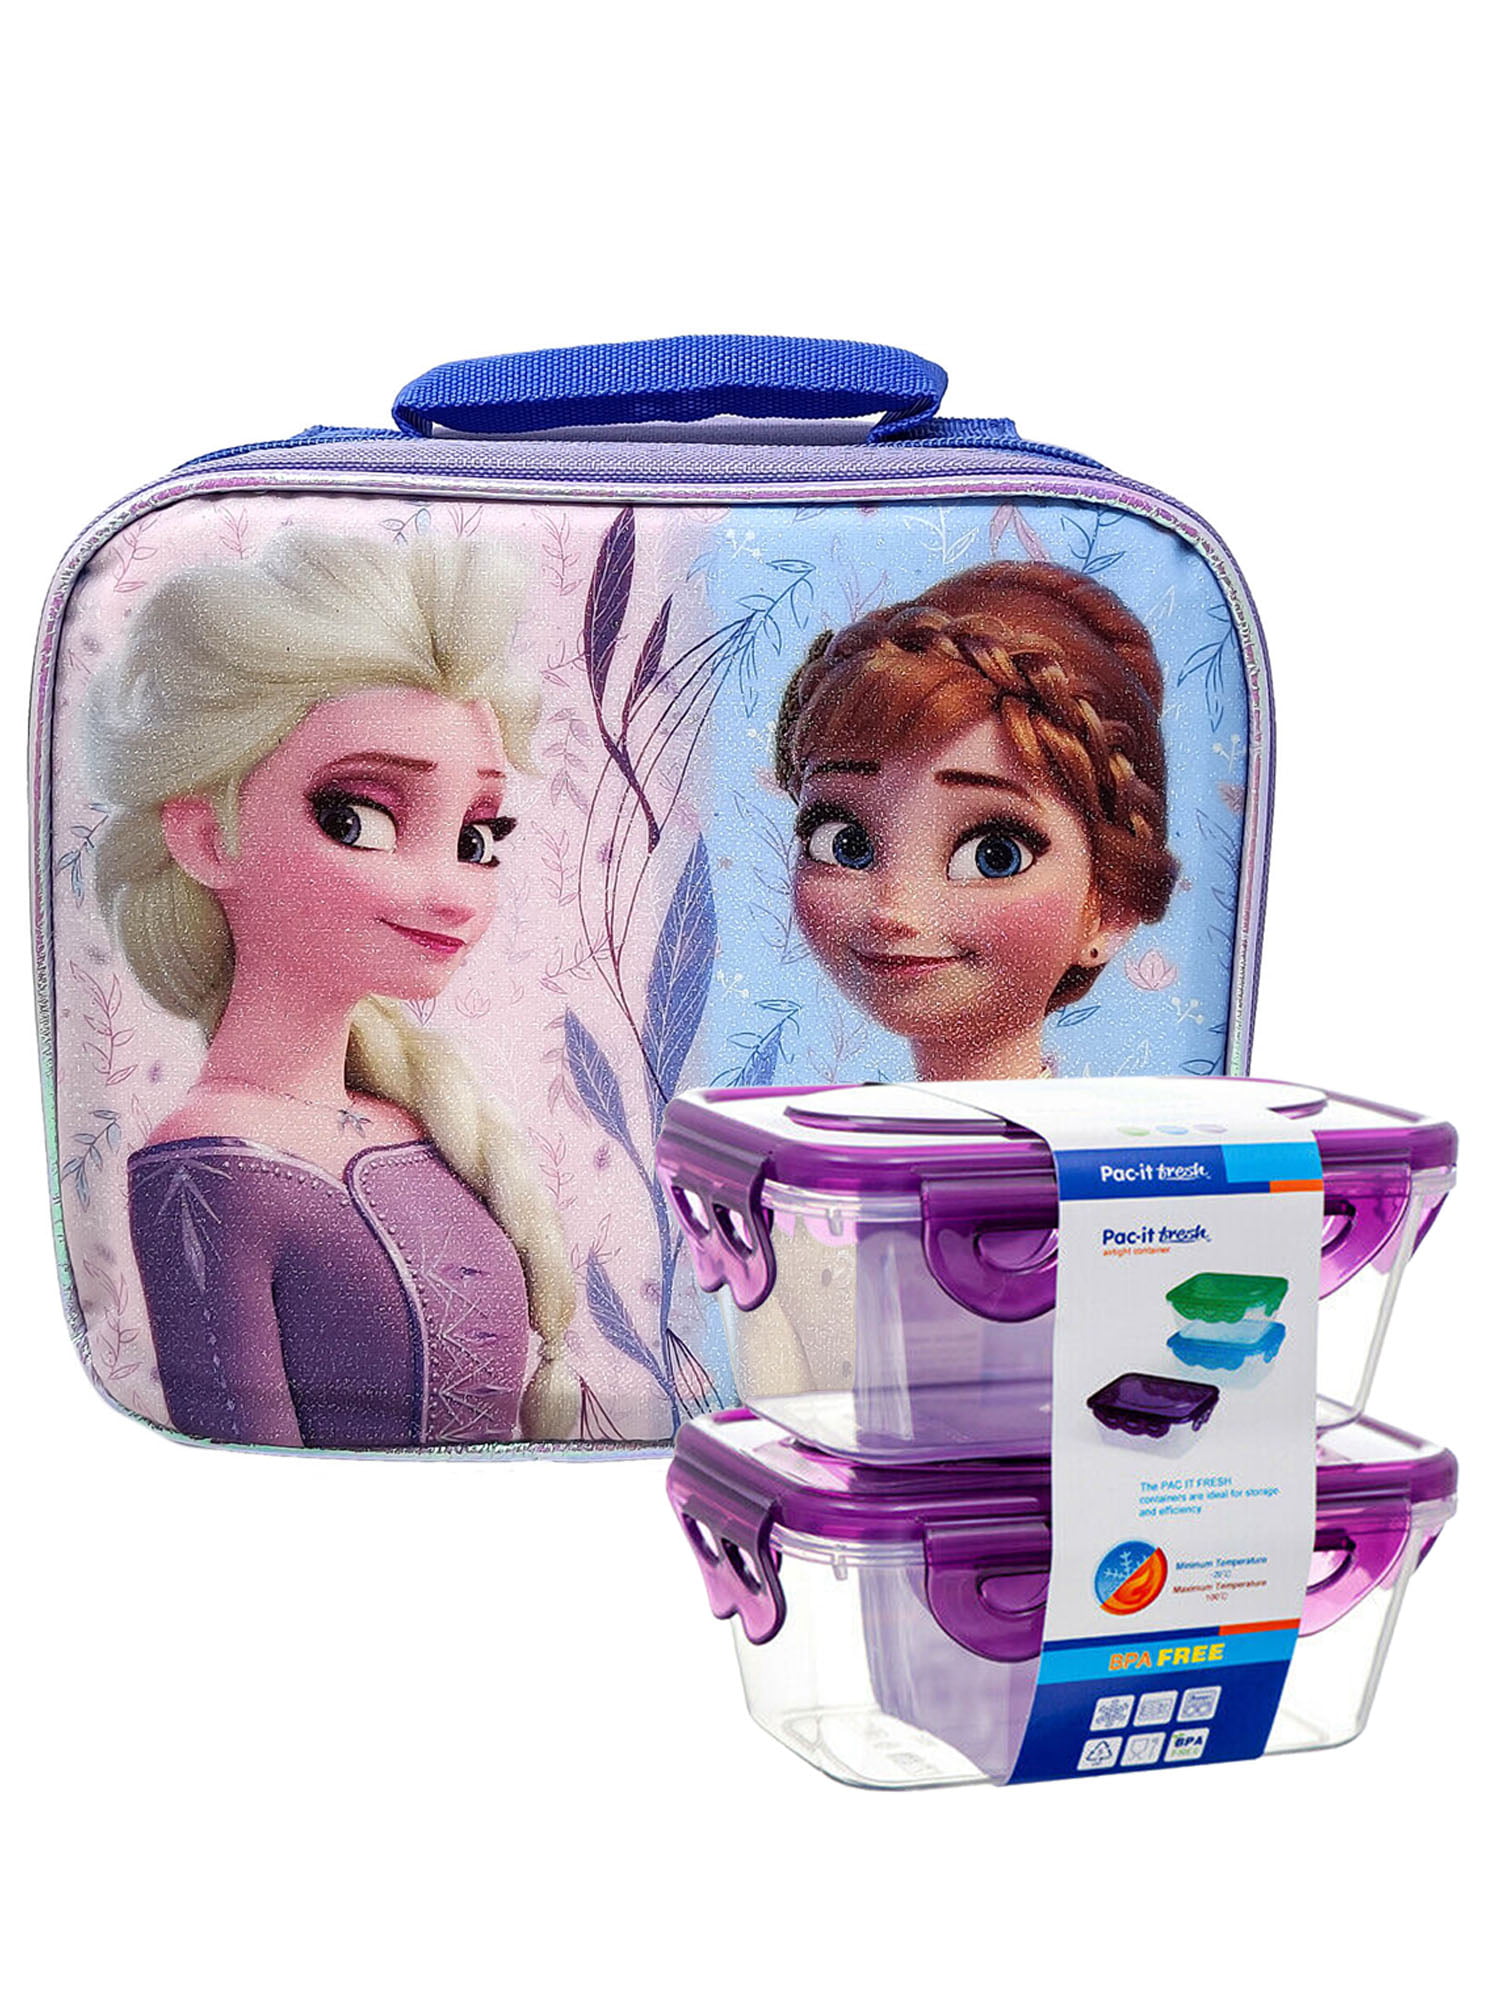 Disney Frozen Birthday Party Snack Boxes Pack of 4 Count NEW 